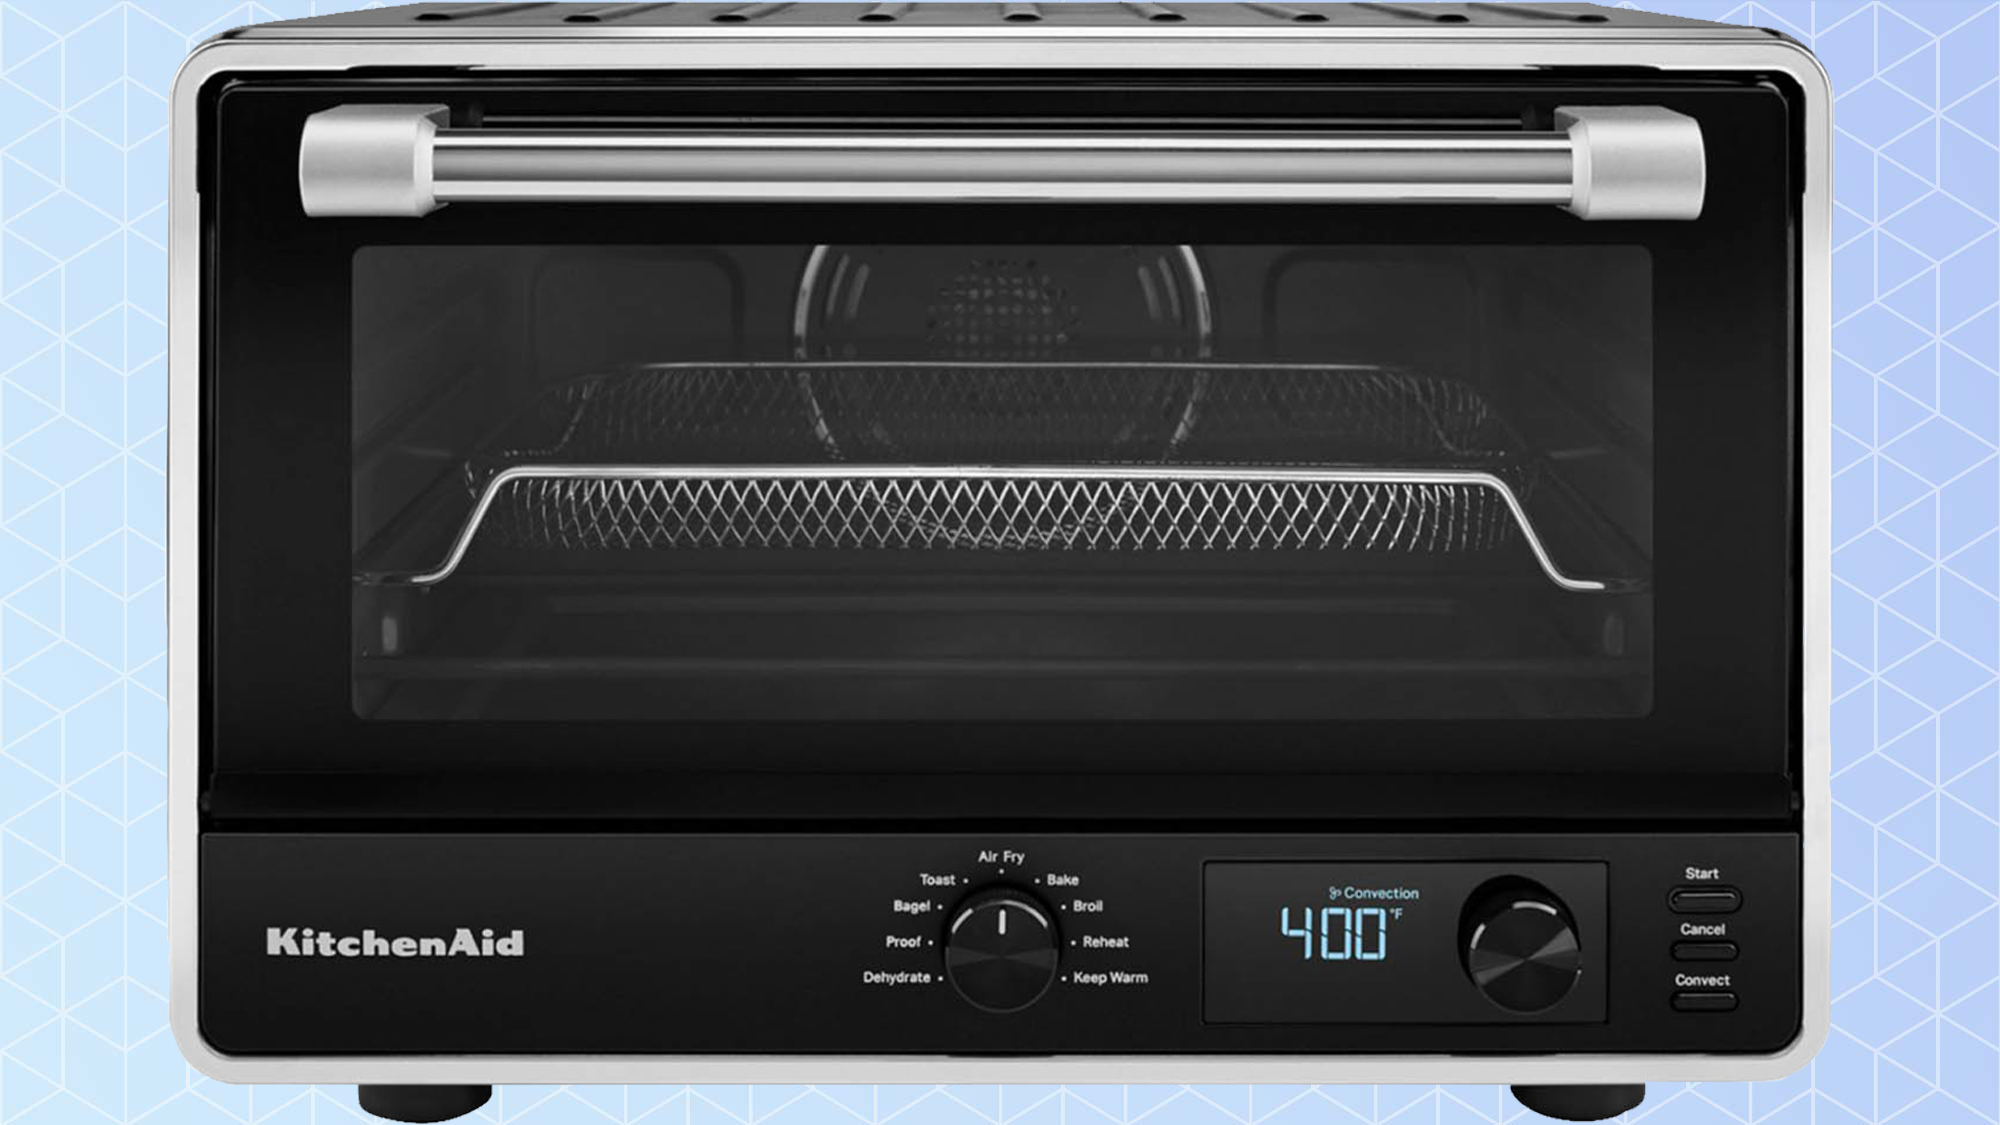 KitchenAid Digital Countertop Oven with Air Fryer Review